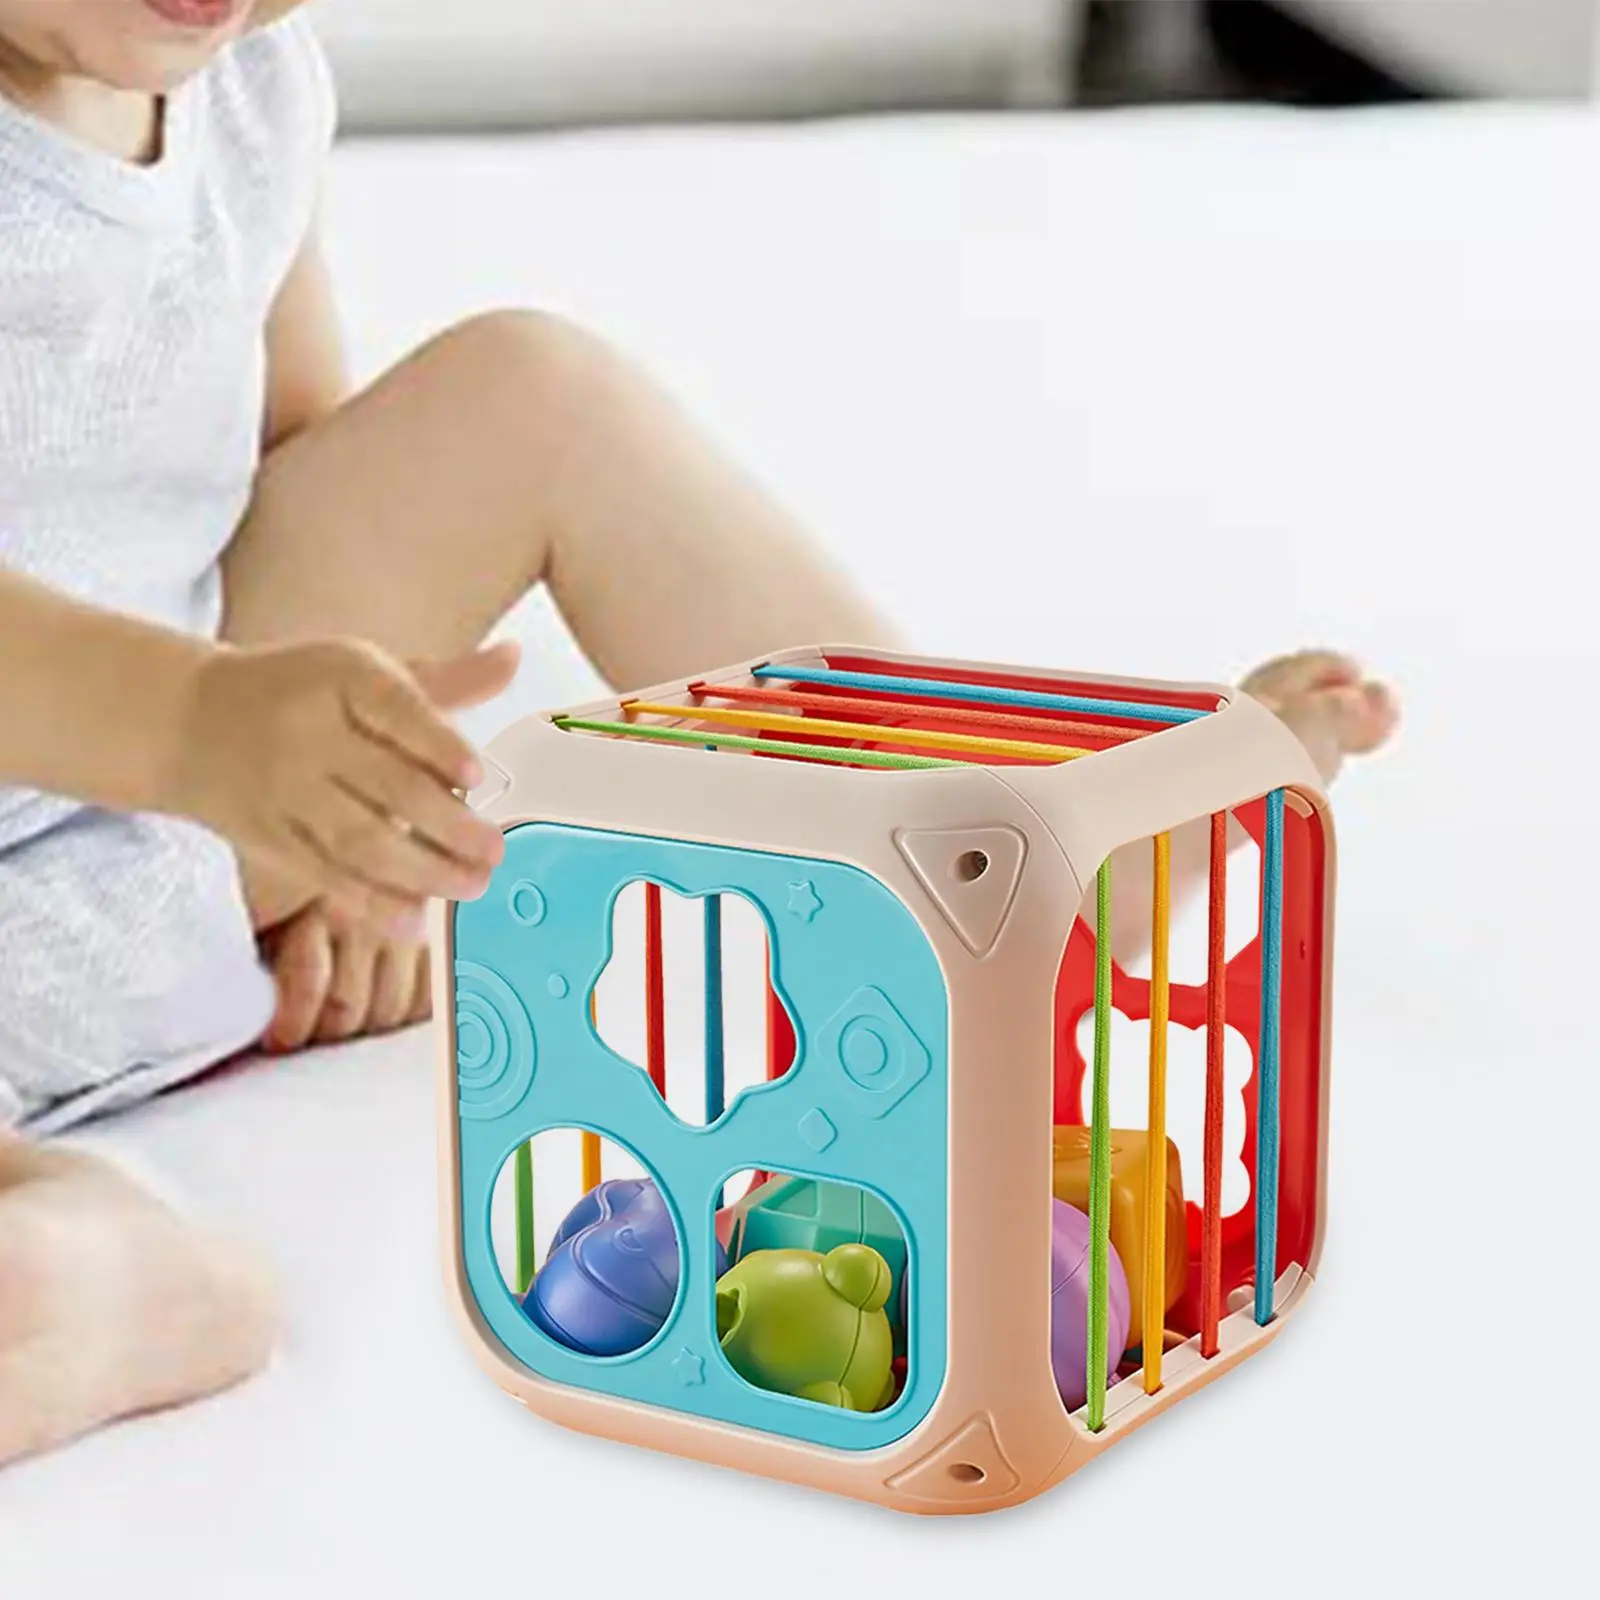 sensory Bin Set with Elastic Bands Color Recognition Educational Matching for Toddlers Birthday Gift Children Kids Baby